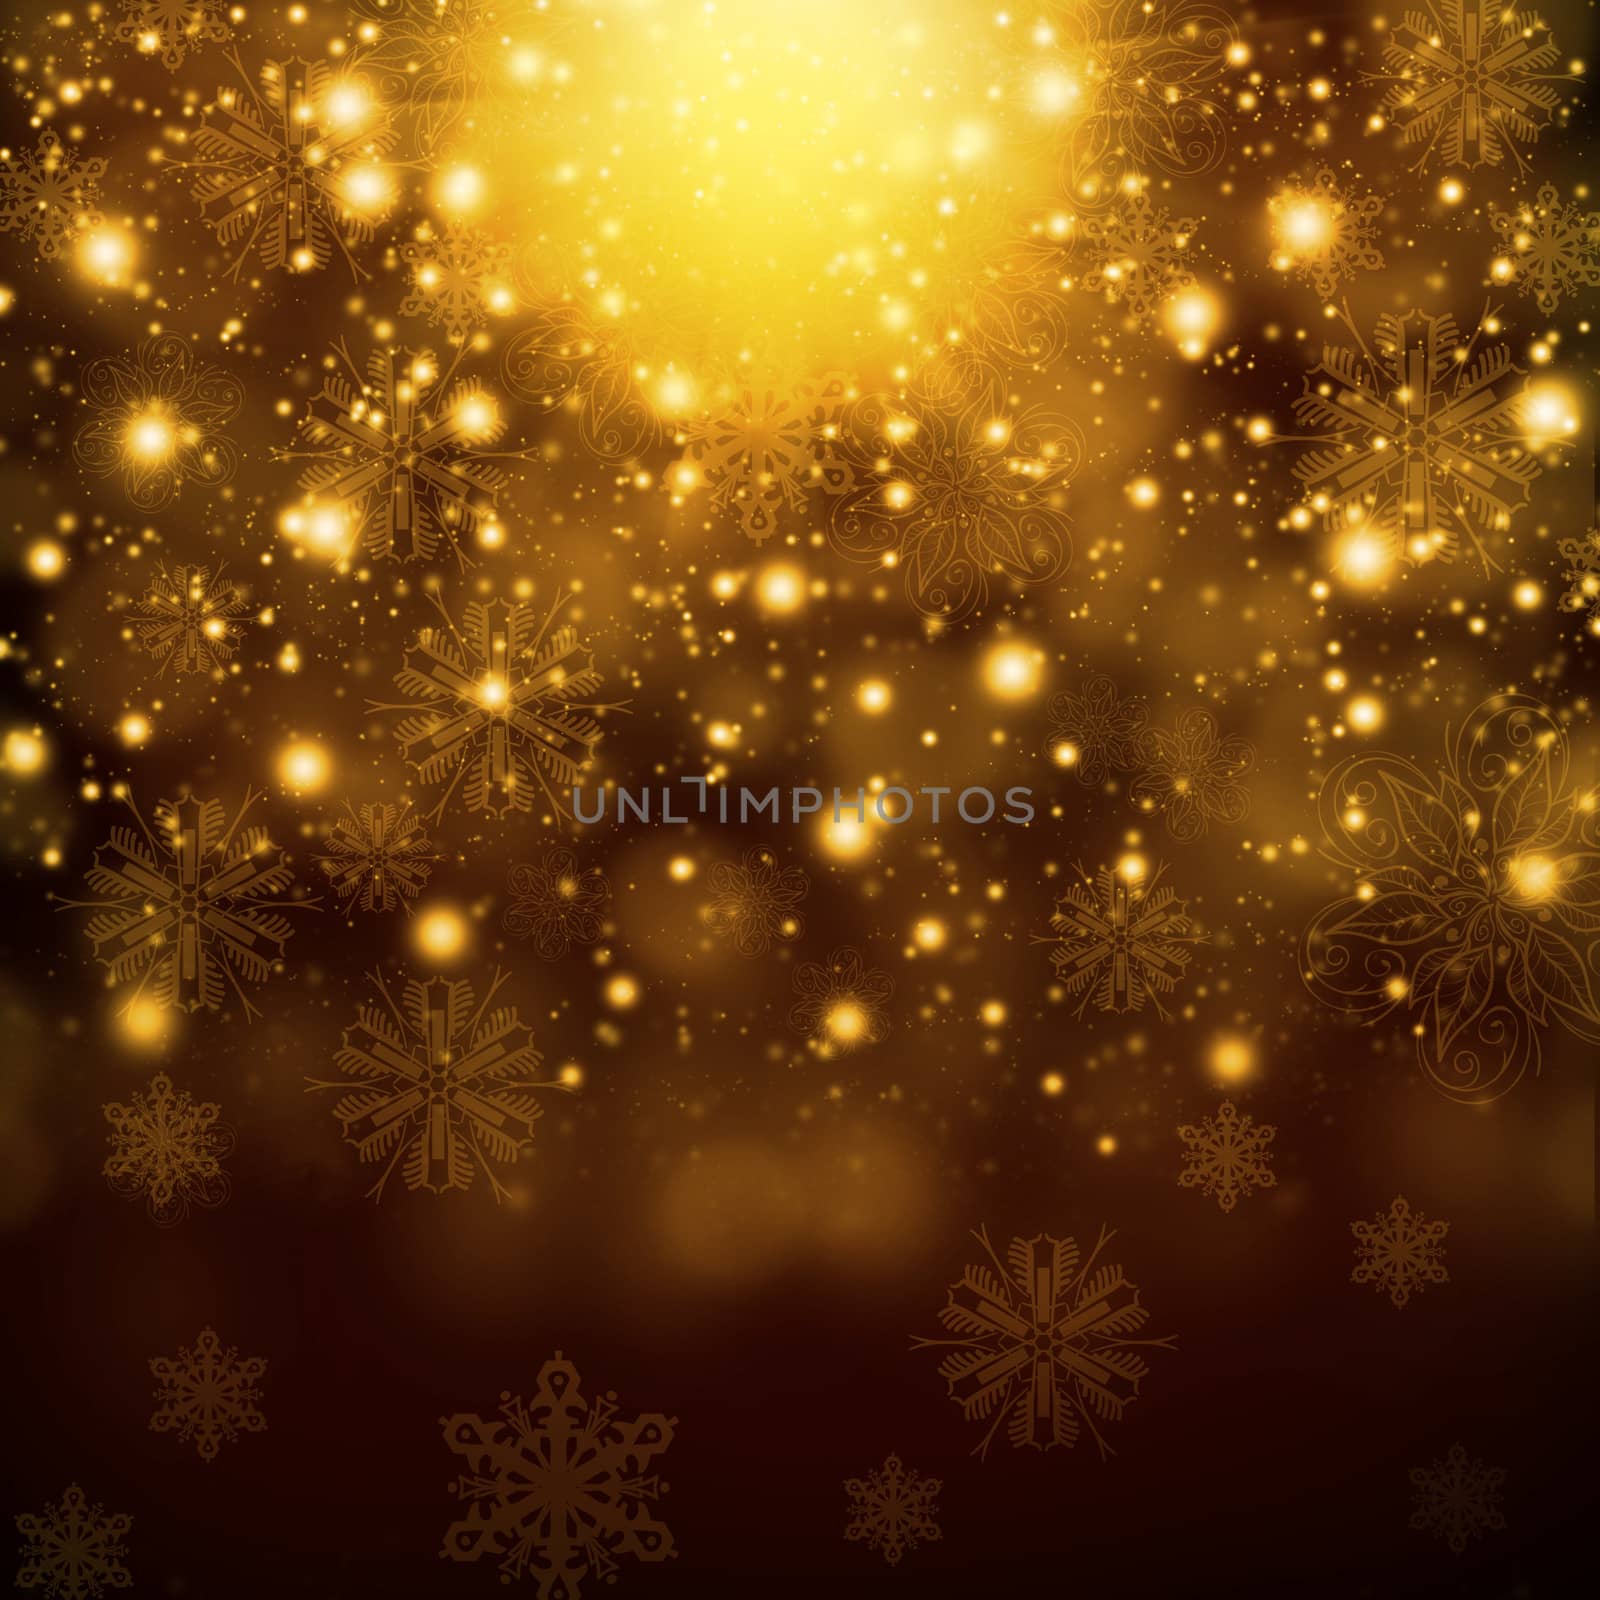 New Year's background. Snowflakes on abstract gold background